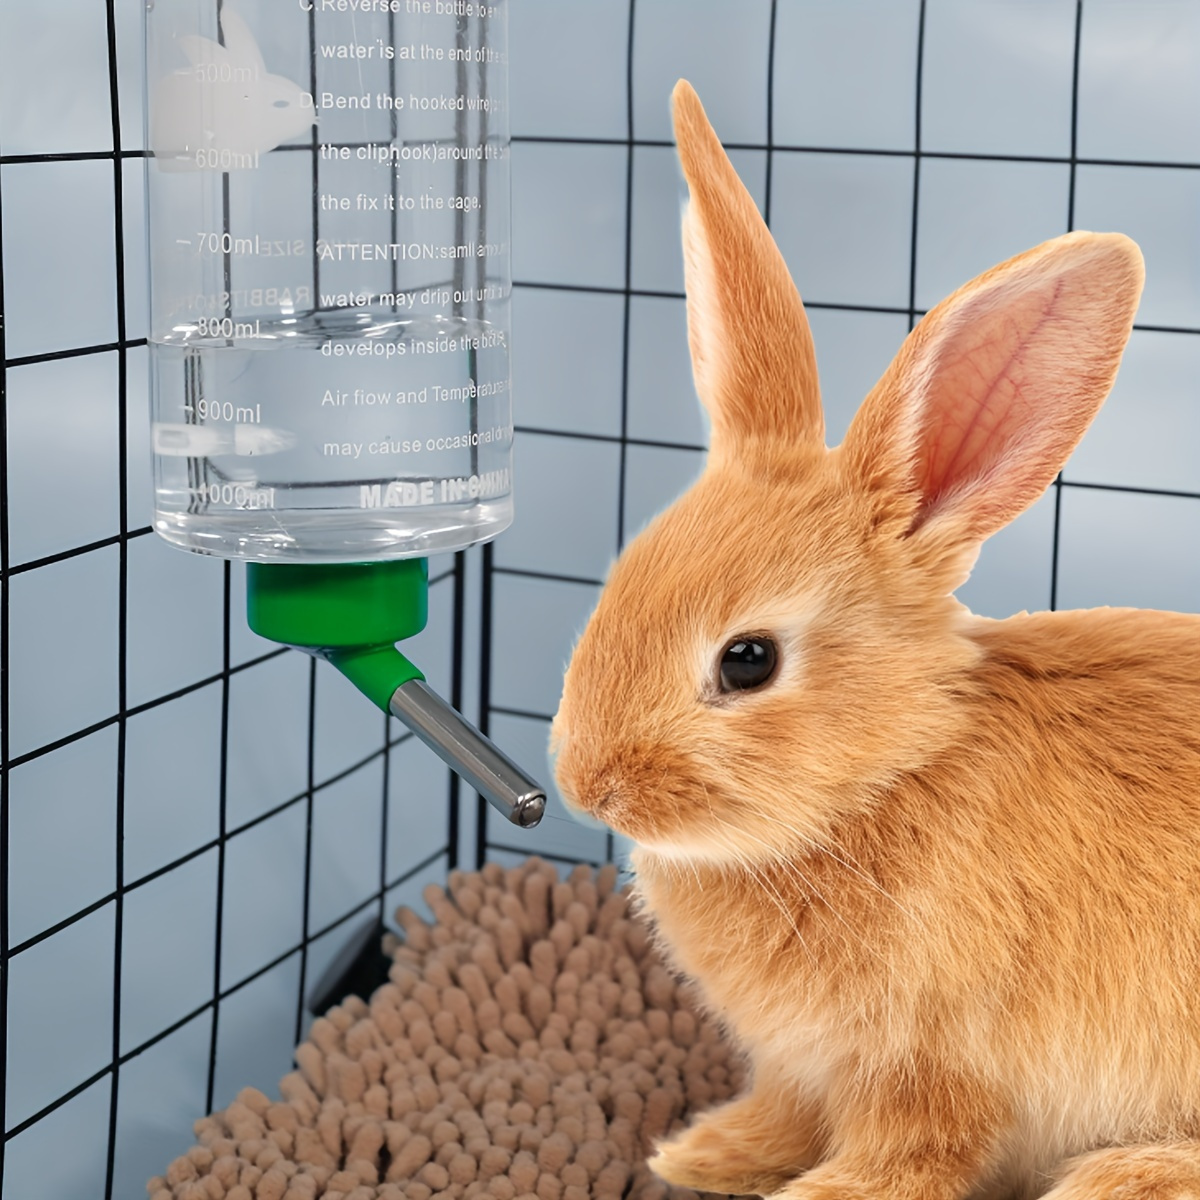 

1pc 33.81oz Convenient Hanging Water Bottle For Small Animals - Perfect For Rabbits And Hamster